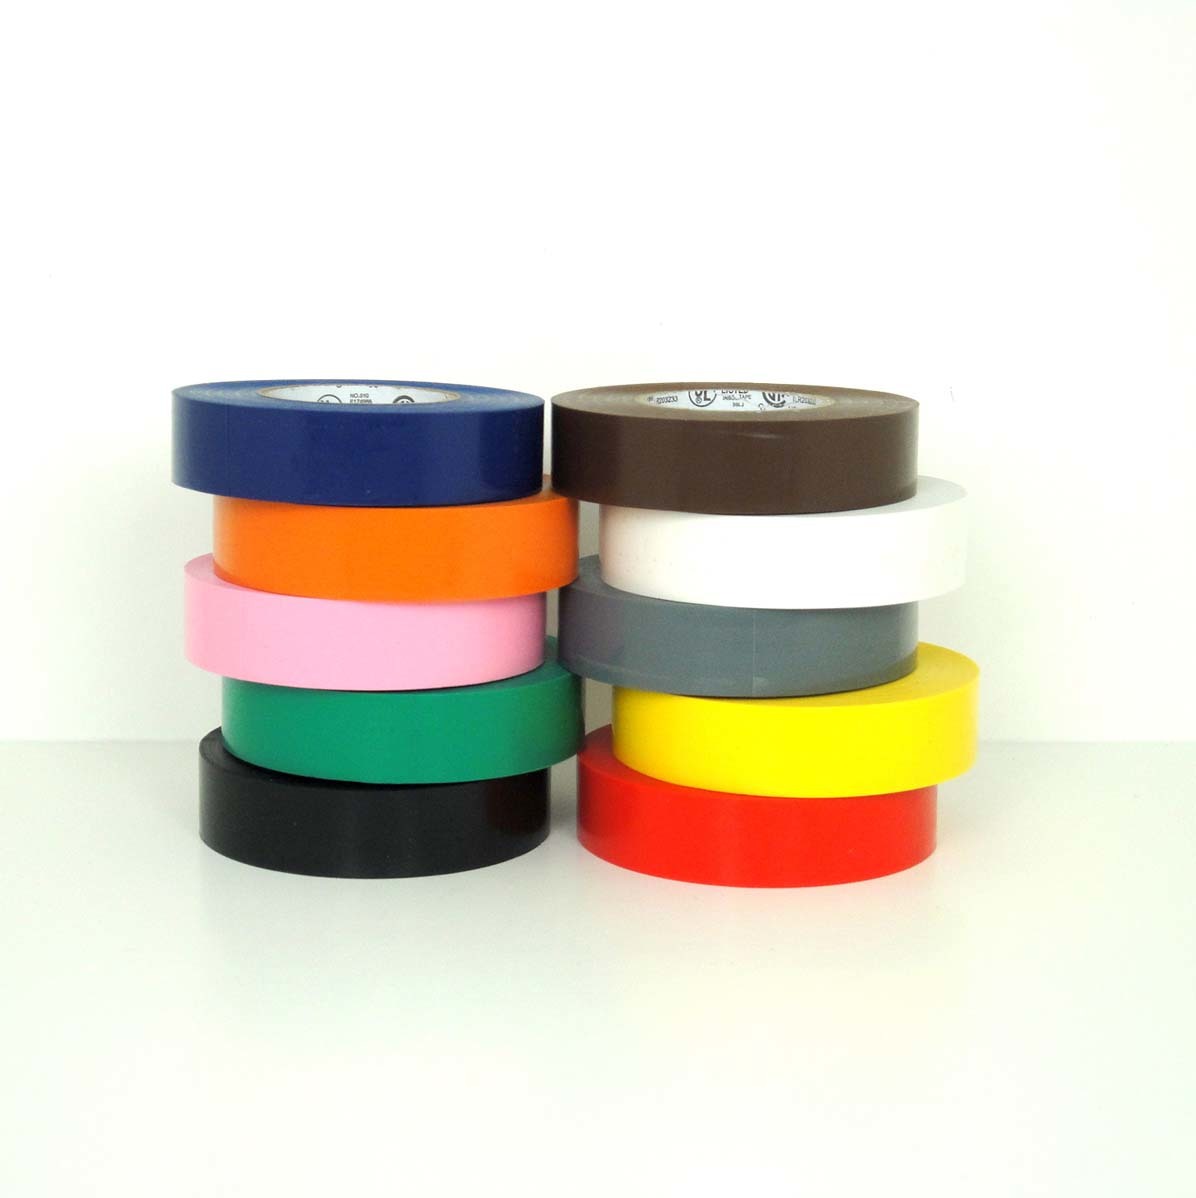 Colored Electrical Tape 3/4 inches (62018b)